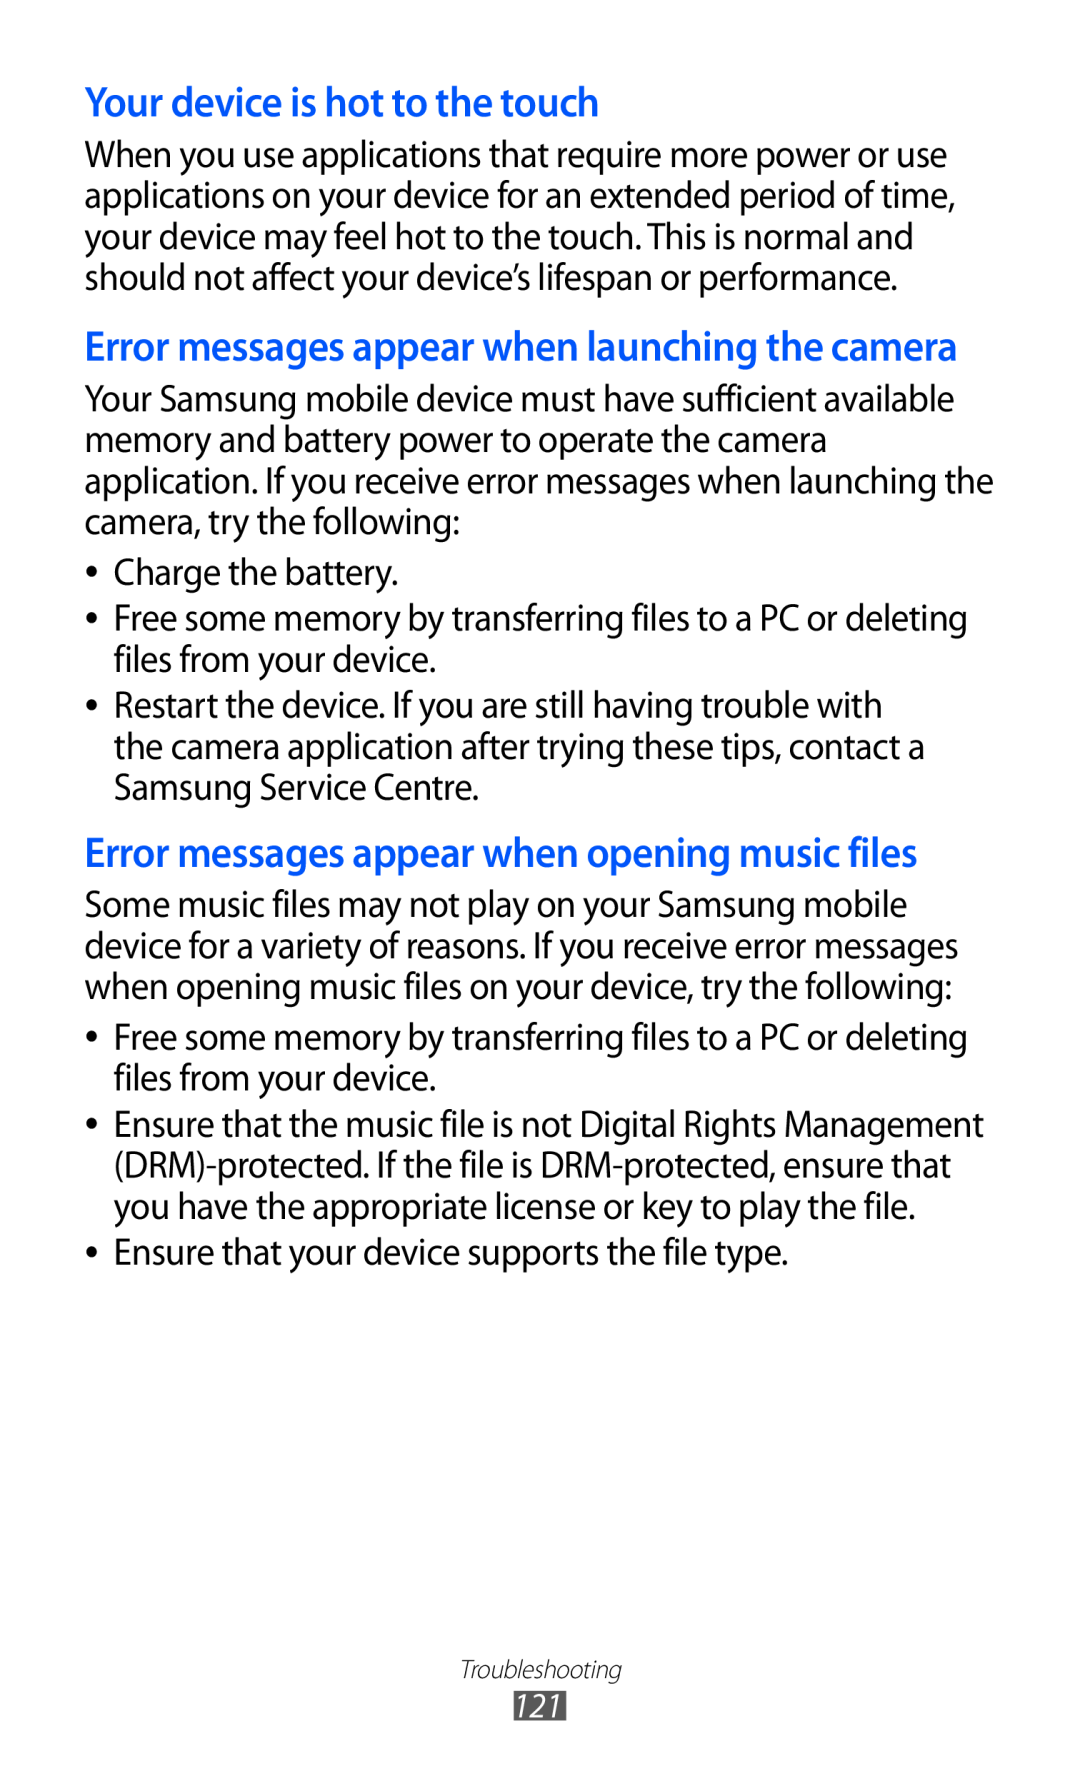 Samsung GT-P7320FKAOPT, GT-P7320UWAVD2 Your device is hot to the touch, Error messages appear when opening music files 